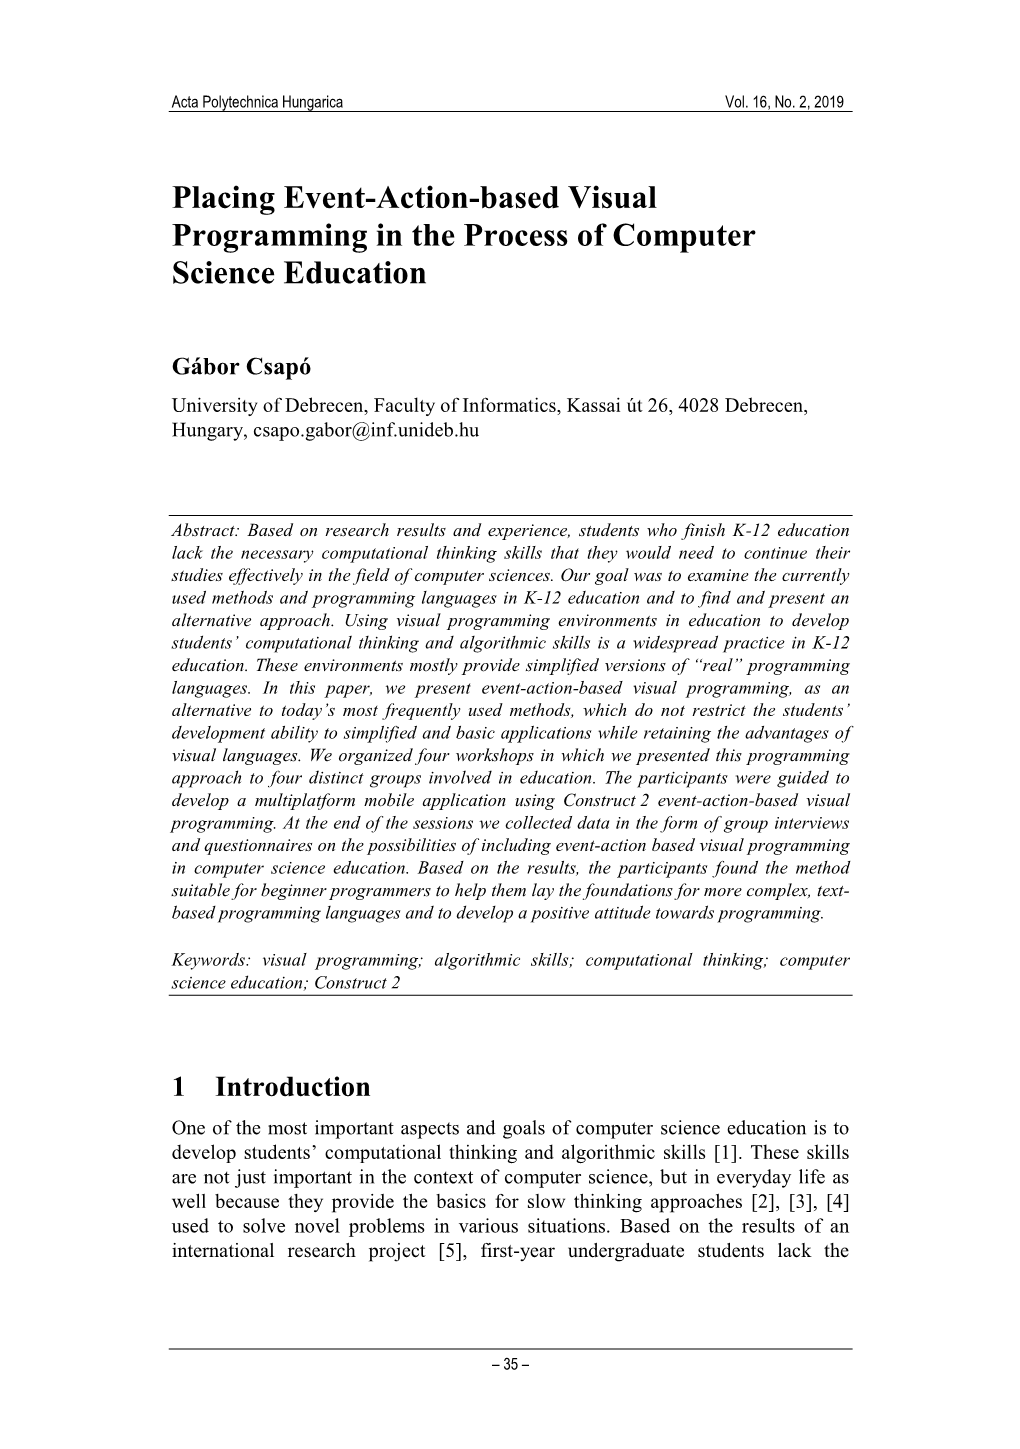 Placing Event-Action-Based Visual Programming in the Process of Computer Science Education